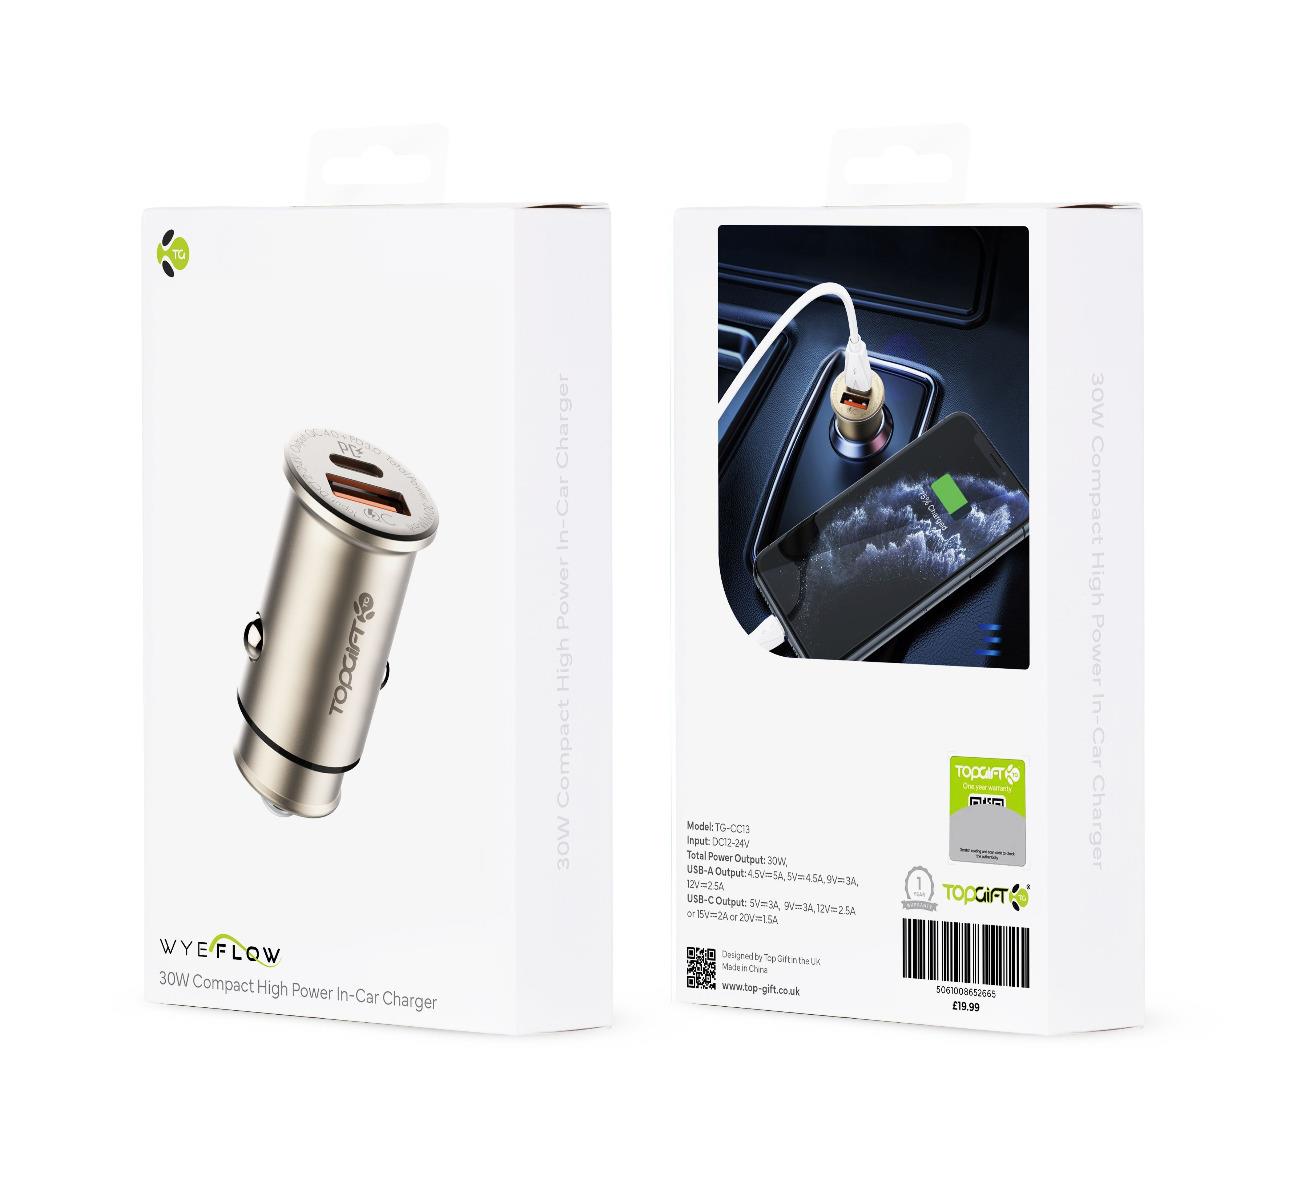 Compact High Power In-Car Charger 30W WYEFLUX